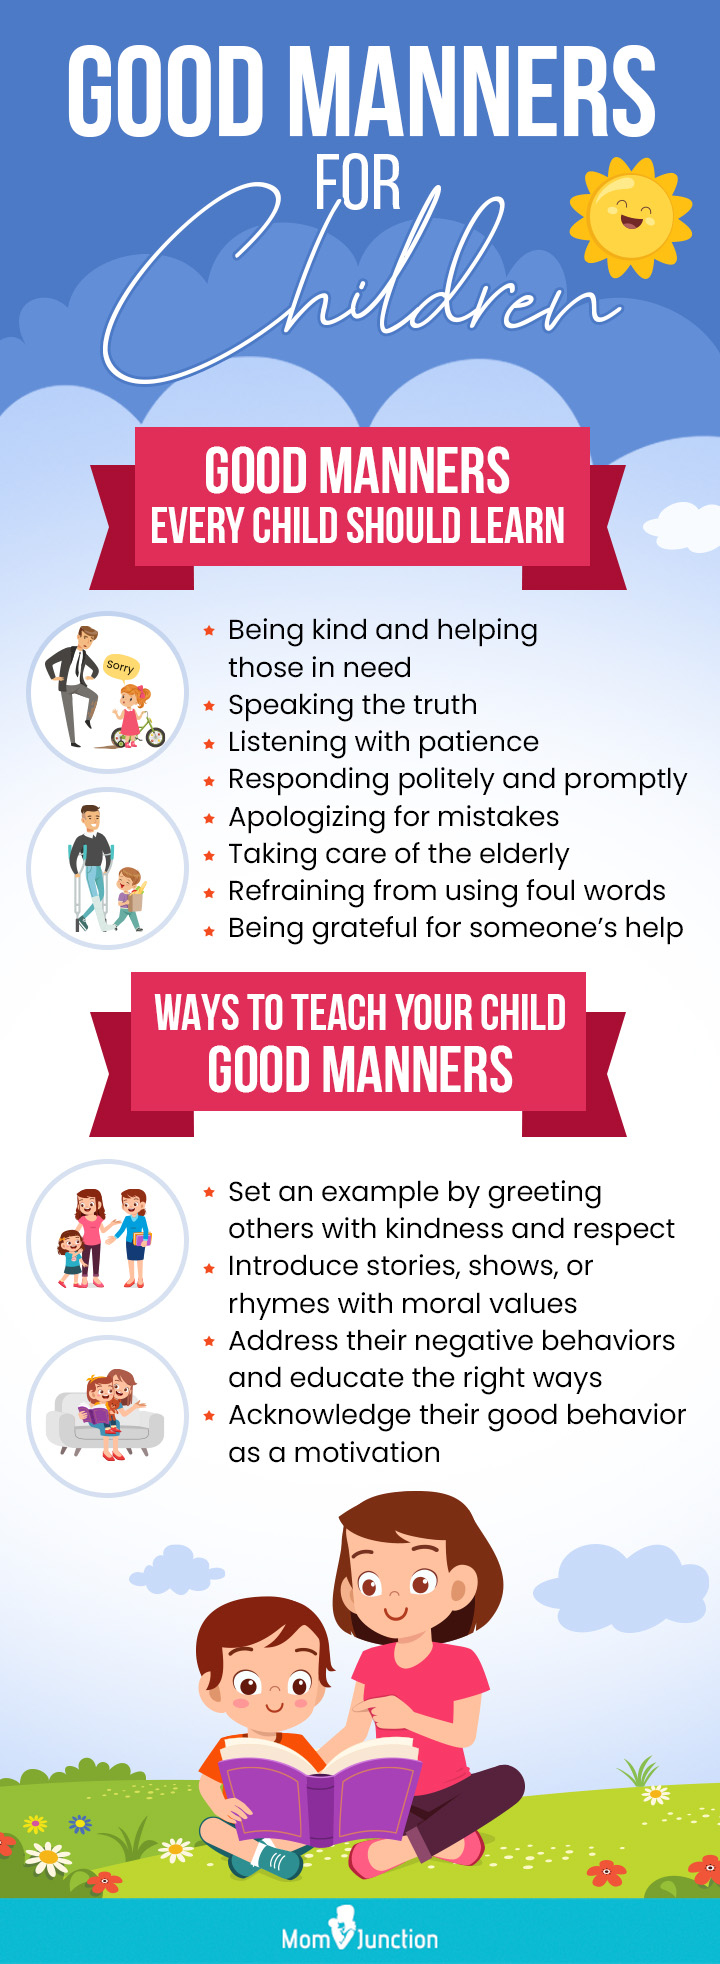 ways to teach good manners to children [Infographic]